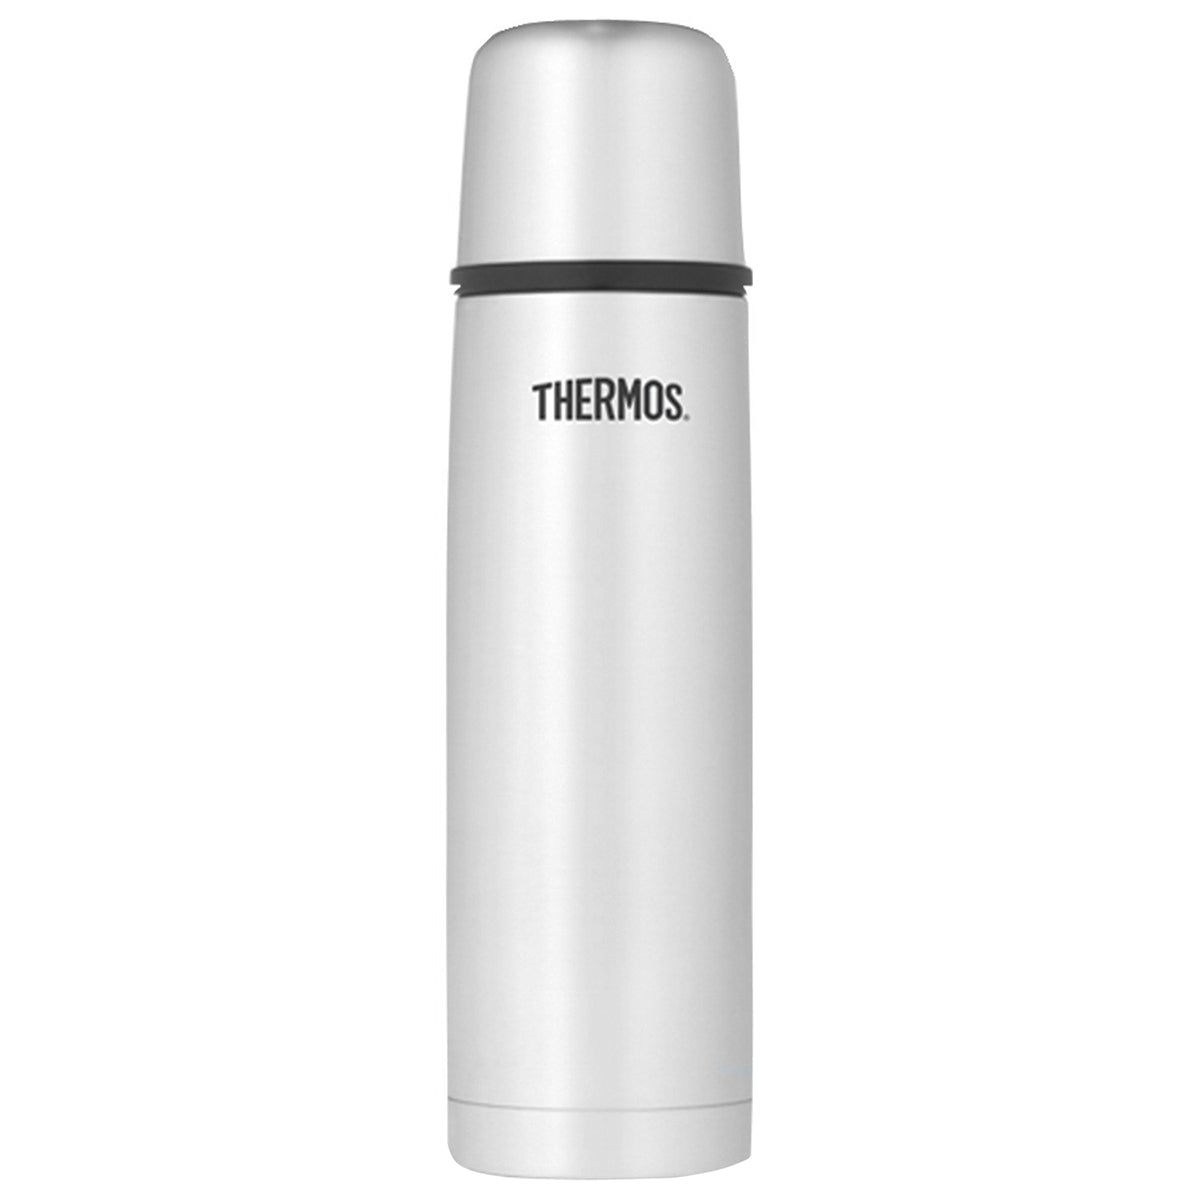 Thermos Vacuum Insulated Stainless Steel Compact Beverage Bottle Thermos